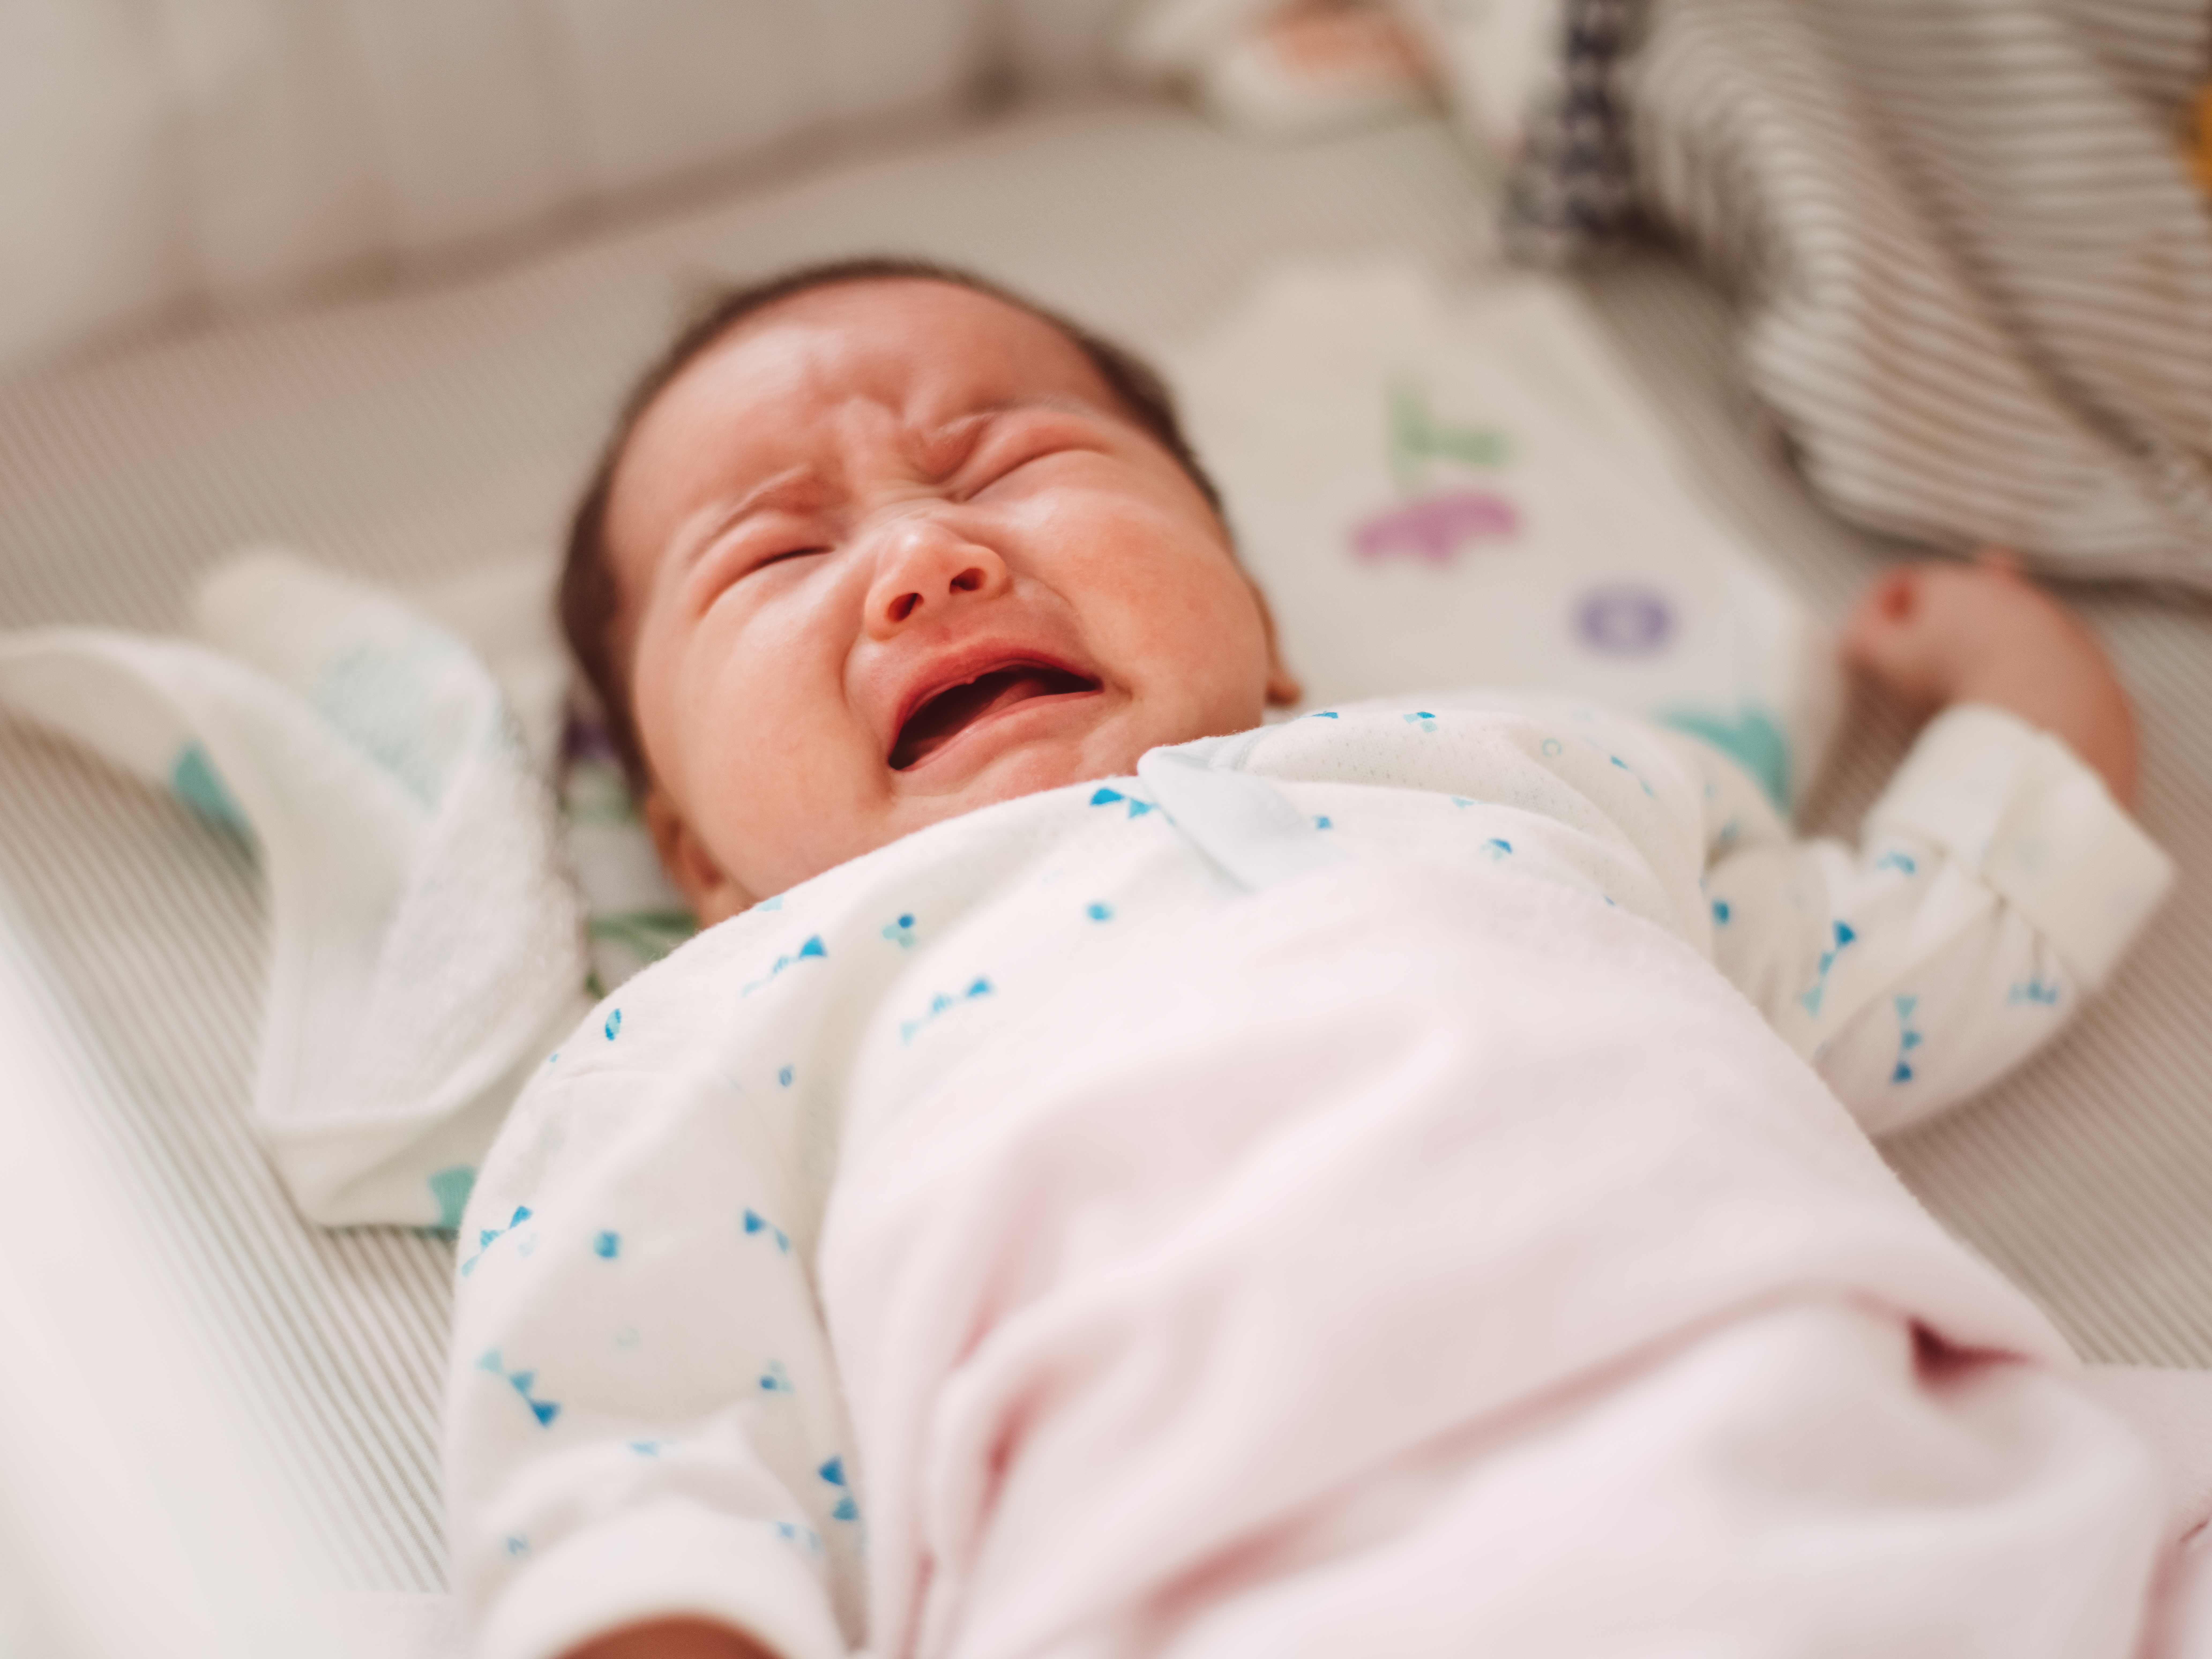 A baby crying | Source: Getty Images